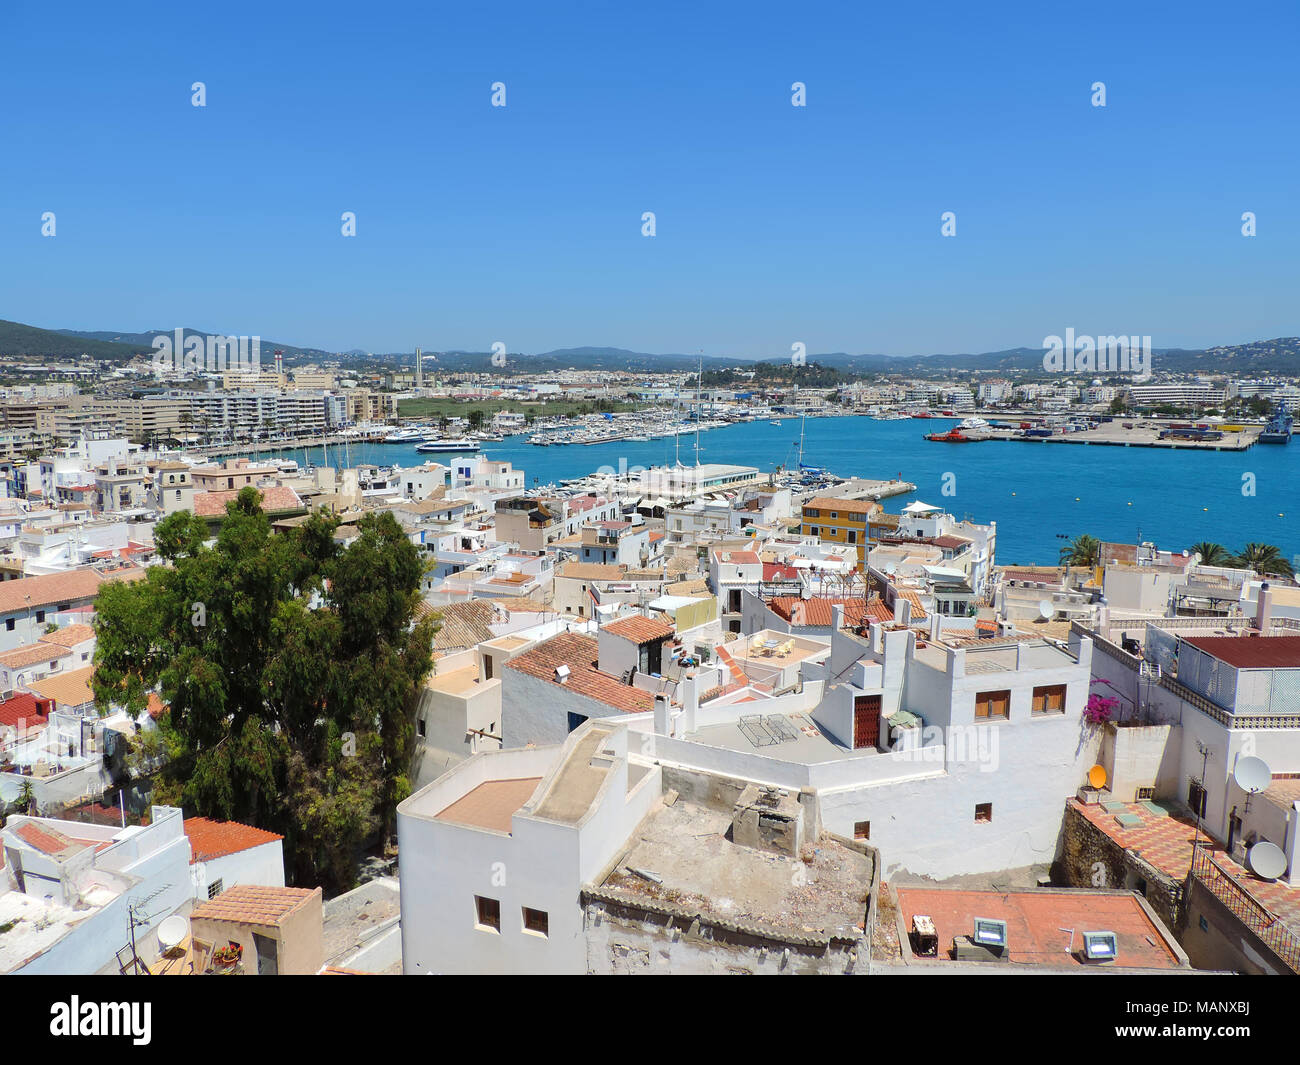 Ibiza town, view from salt Vila to the marina or harbor. Summer scene with panorama view over the historic city of Ibiza. Stock Photo